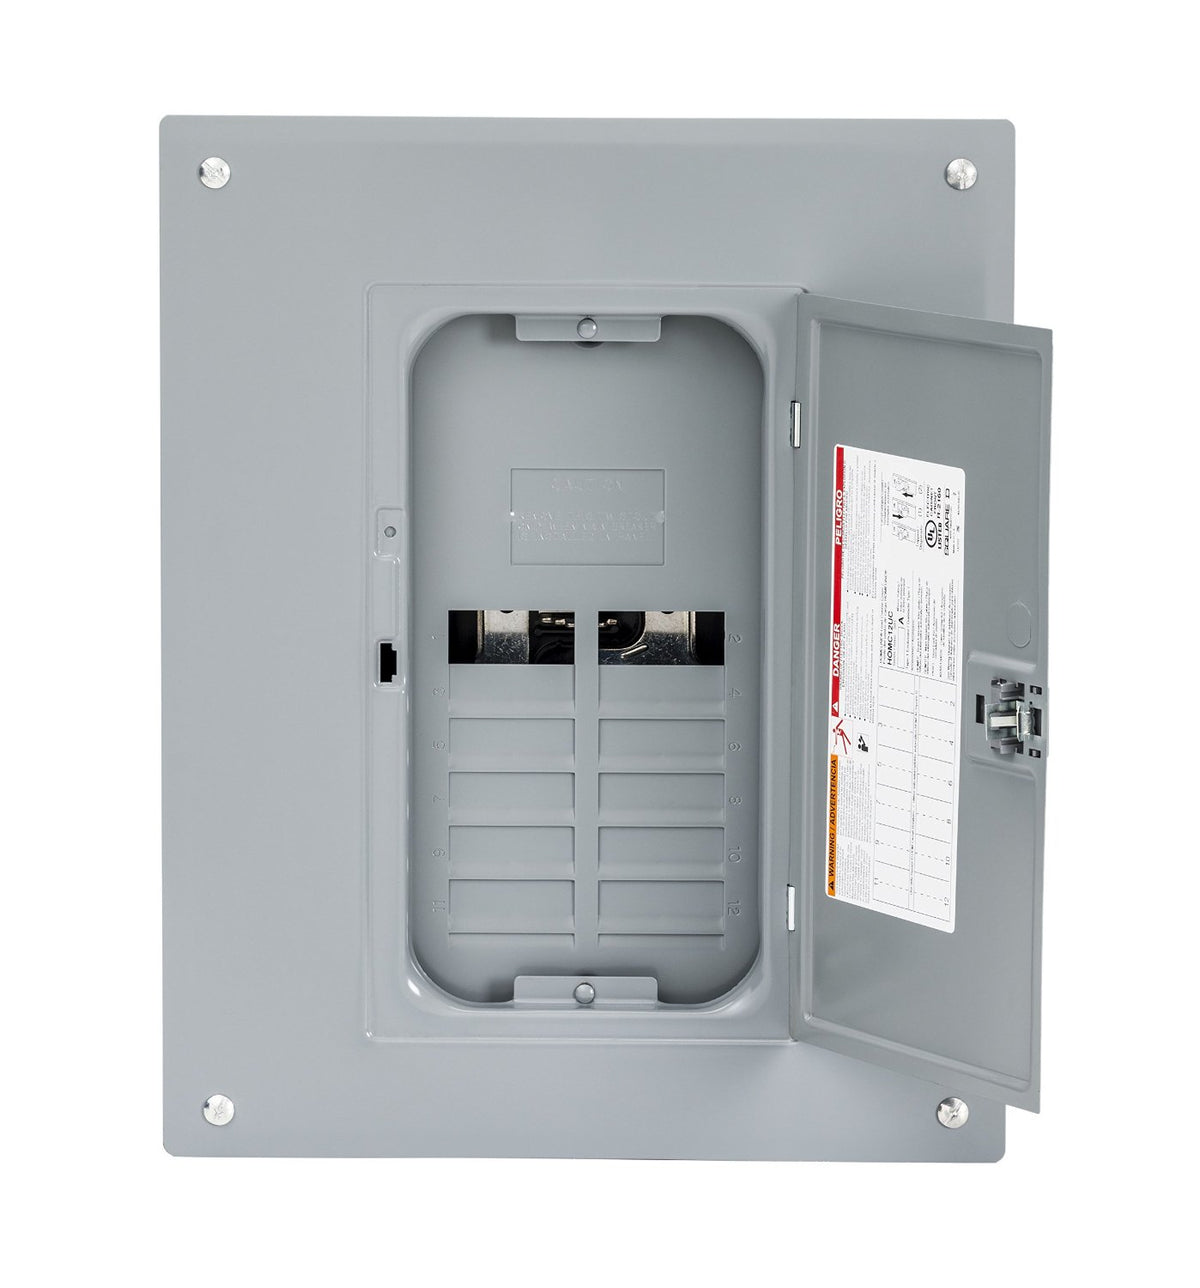 buy electrical panel boxes at cheap rate in bulk. wholesale & retail electrical equipments store. home décor ideas, maintenance, repair replacement parts